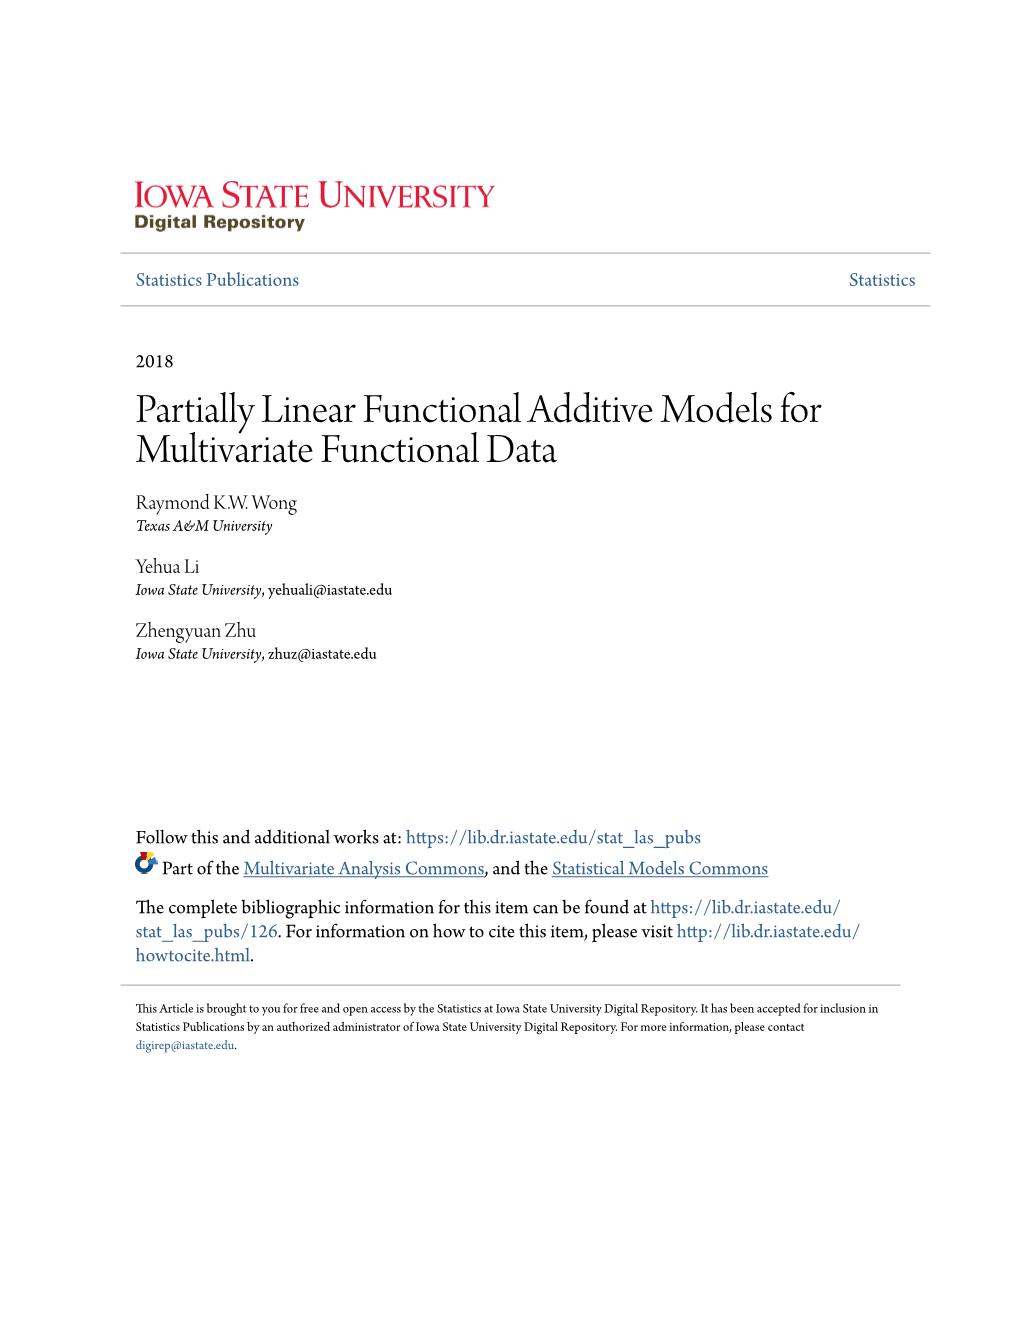 Partially Linear Functional Additive Models for Multivariate Functional Data Raymond K.W